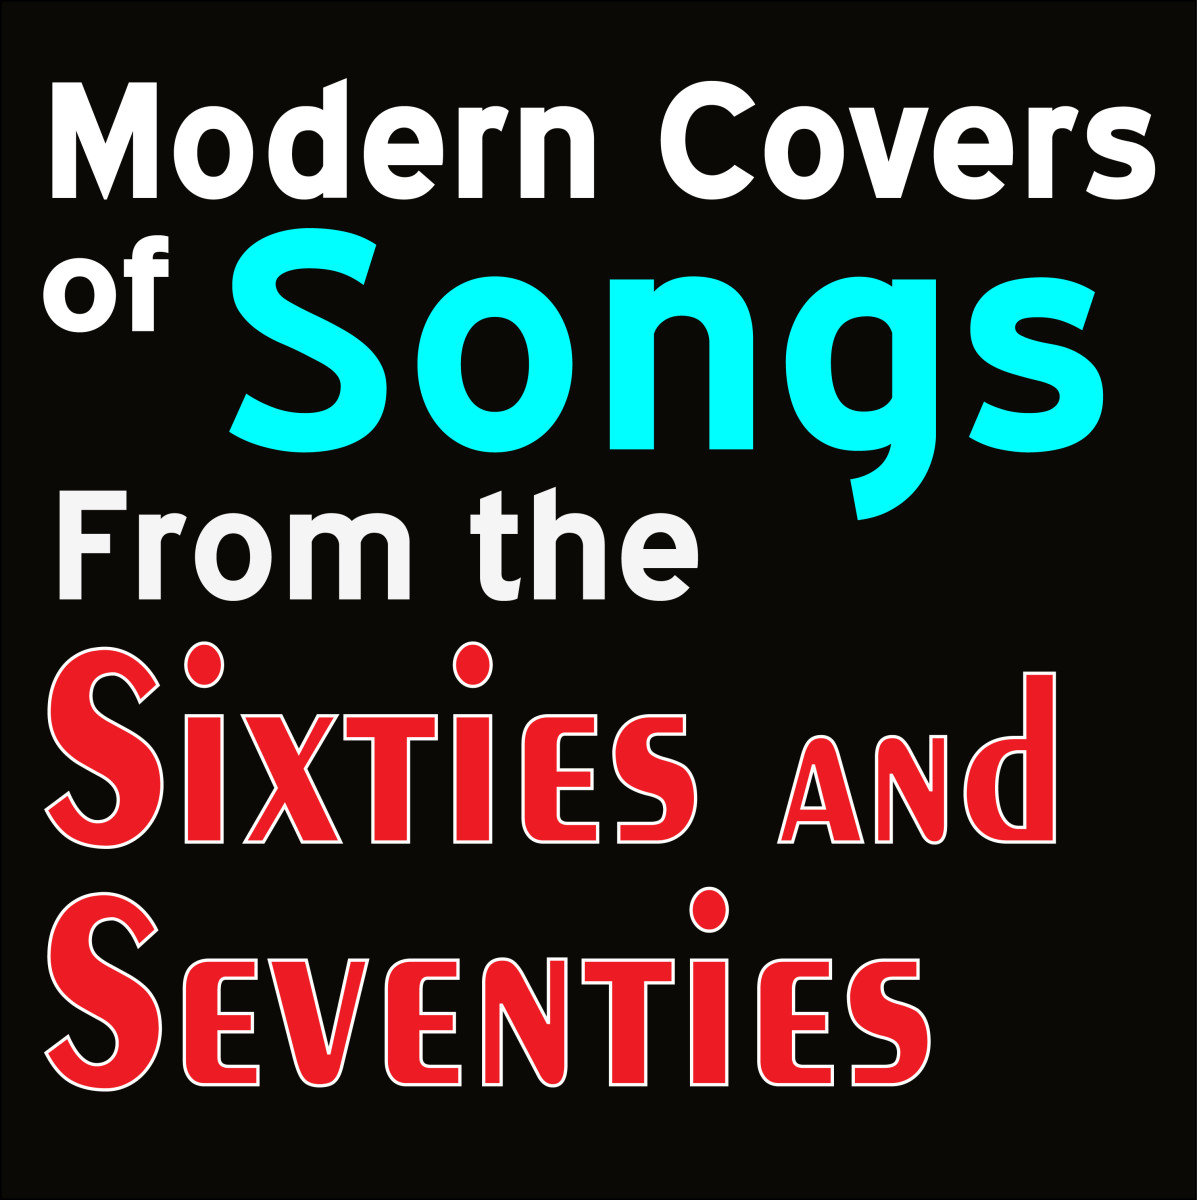 10-modern-covers-of-songs-from-the-sixties-and-seventies